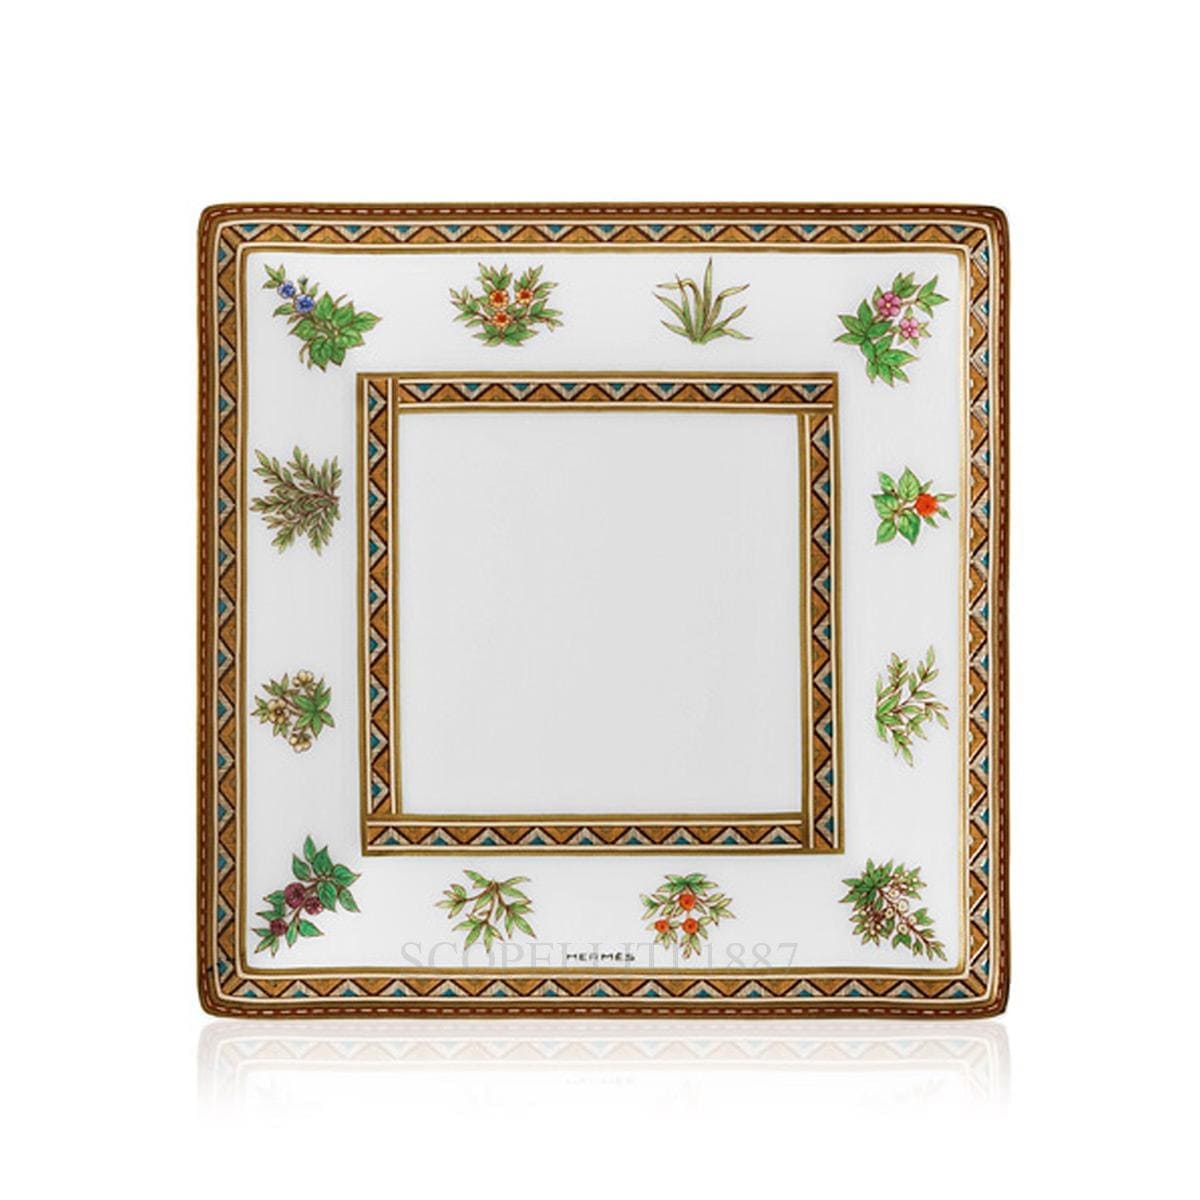 Hermes Square Plate n°2 Cheval d’Orient